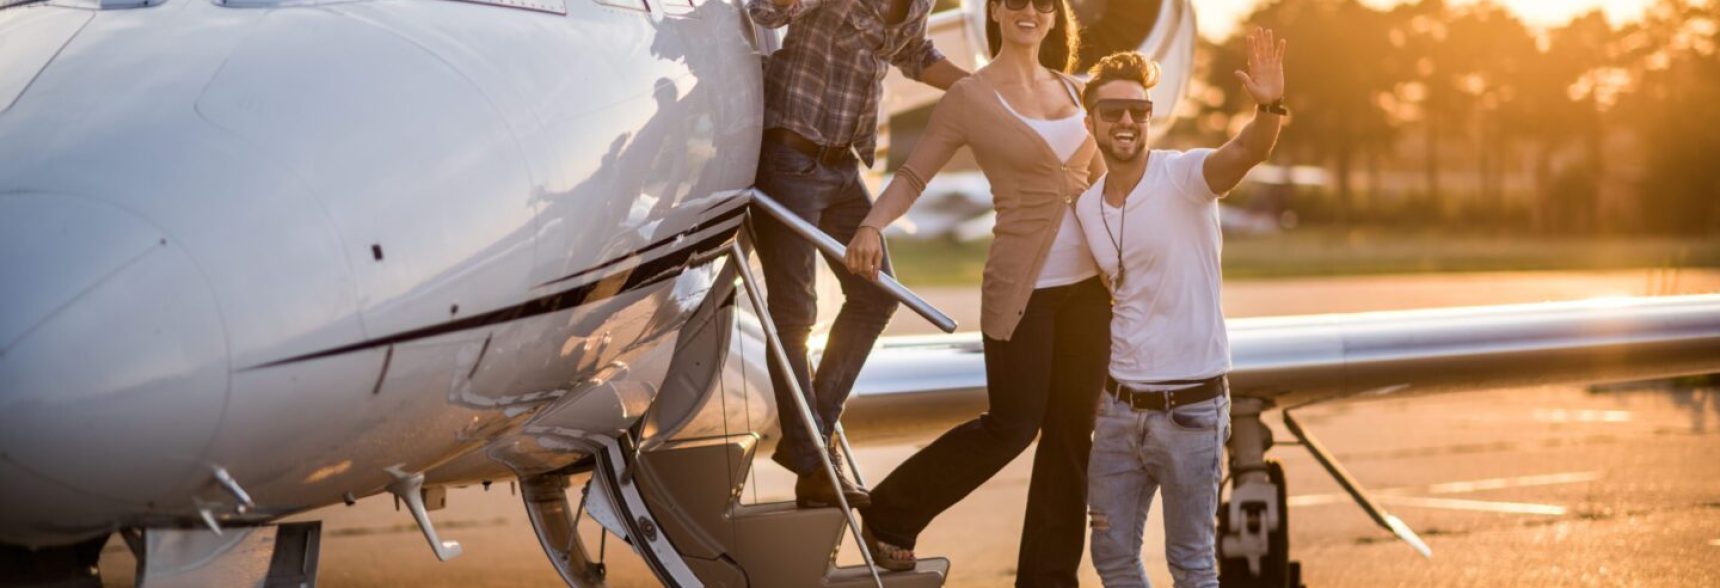 Three people standing on the stairs of private jet airplane and waving. They are all wearing sunglasses. Bright sunlight is in the background.